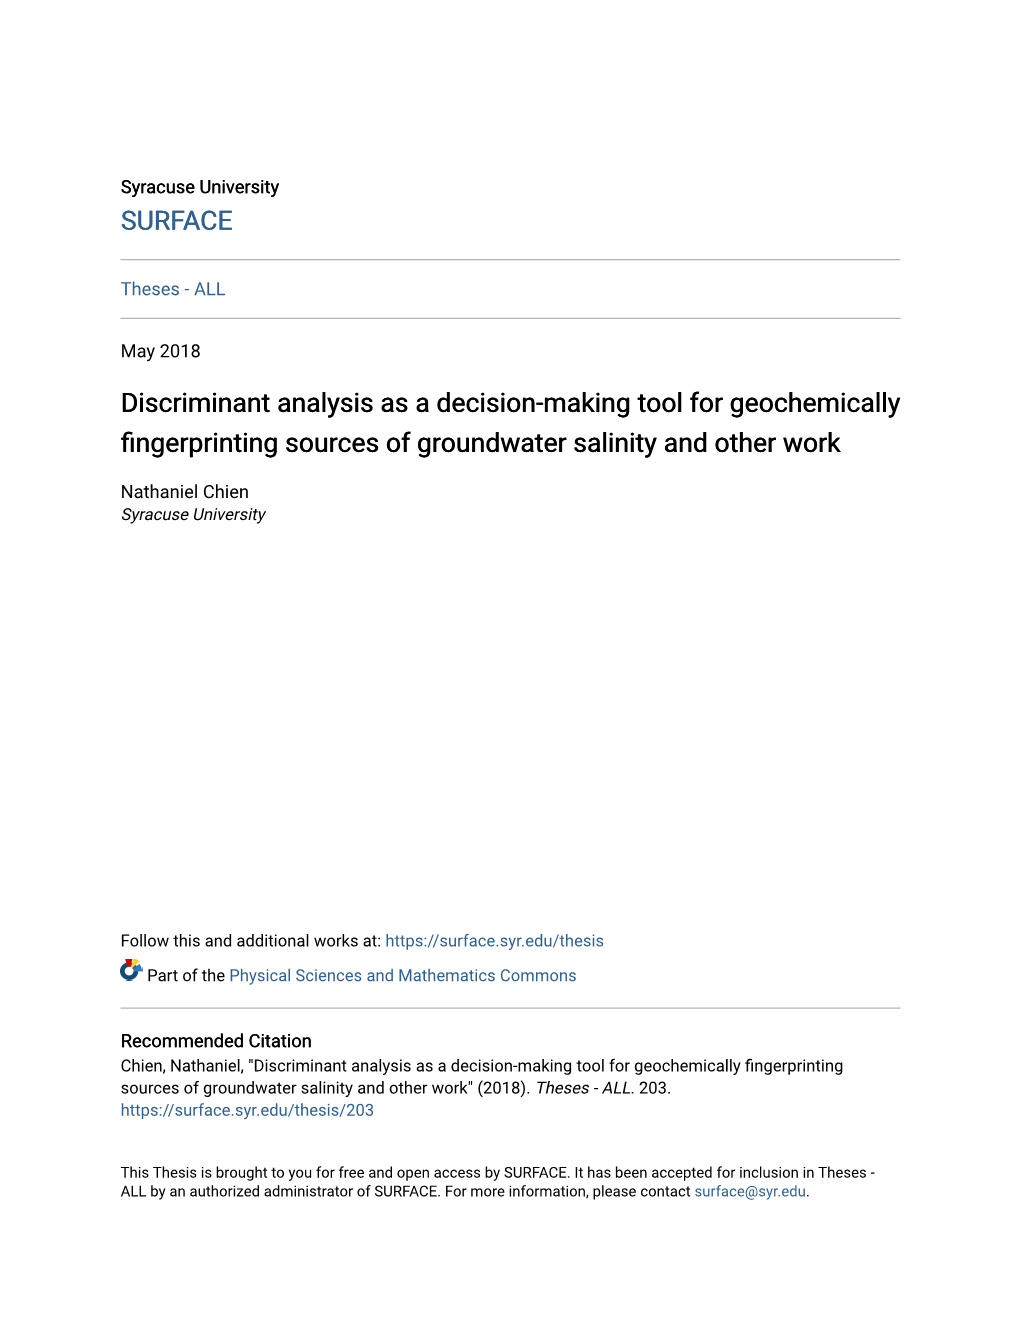 Discriminant Analysis As a Decision-Making Tool for Geochemically Fingerprinting Sources of Groundwater Salinity and Other Work